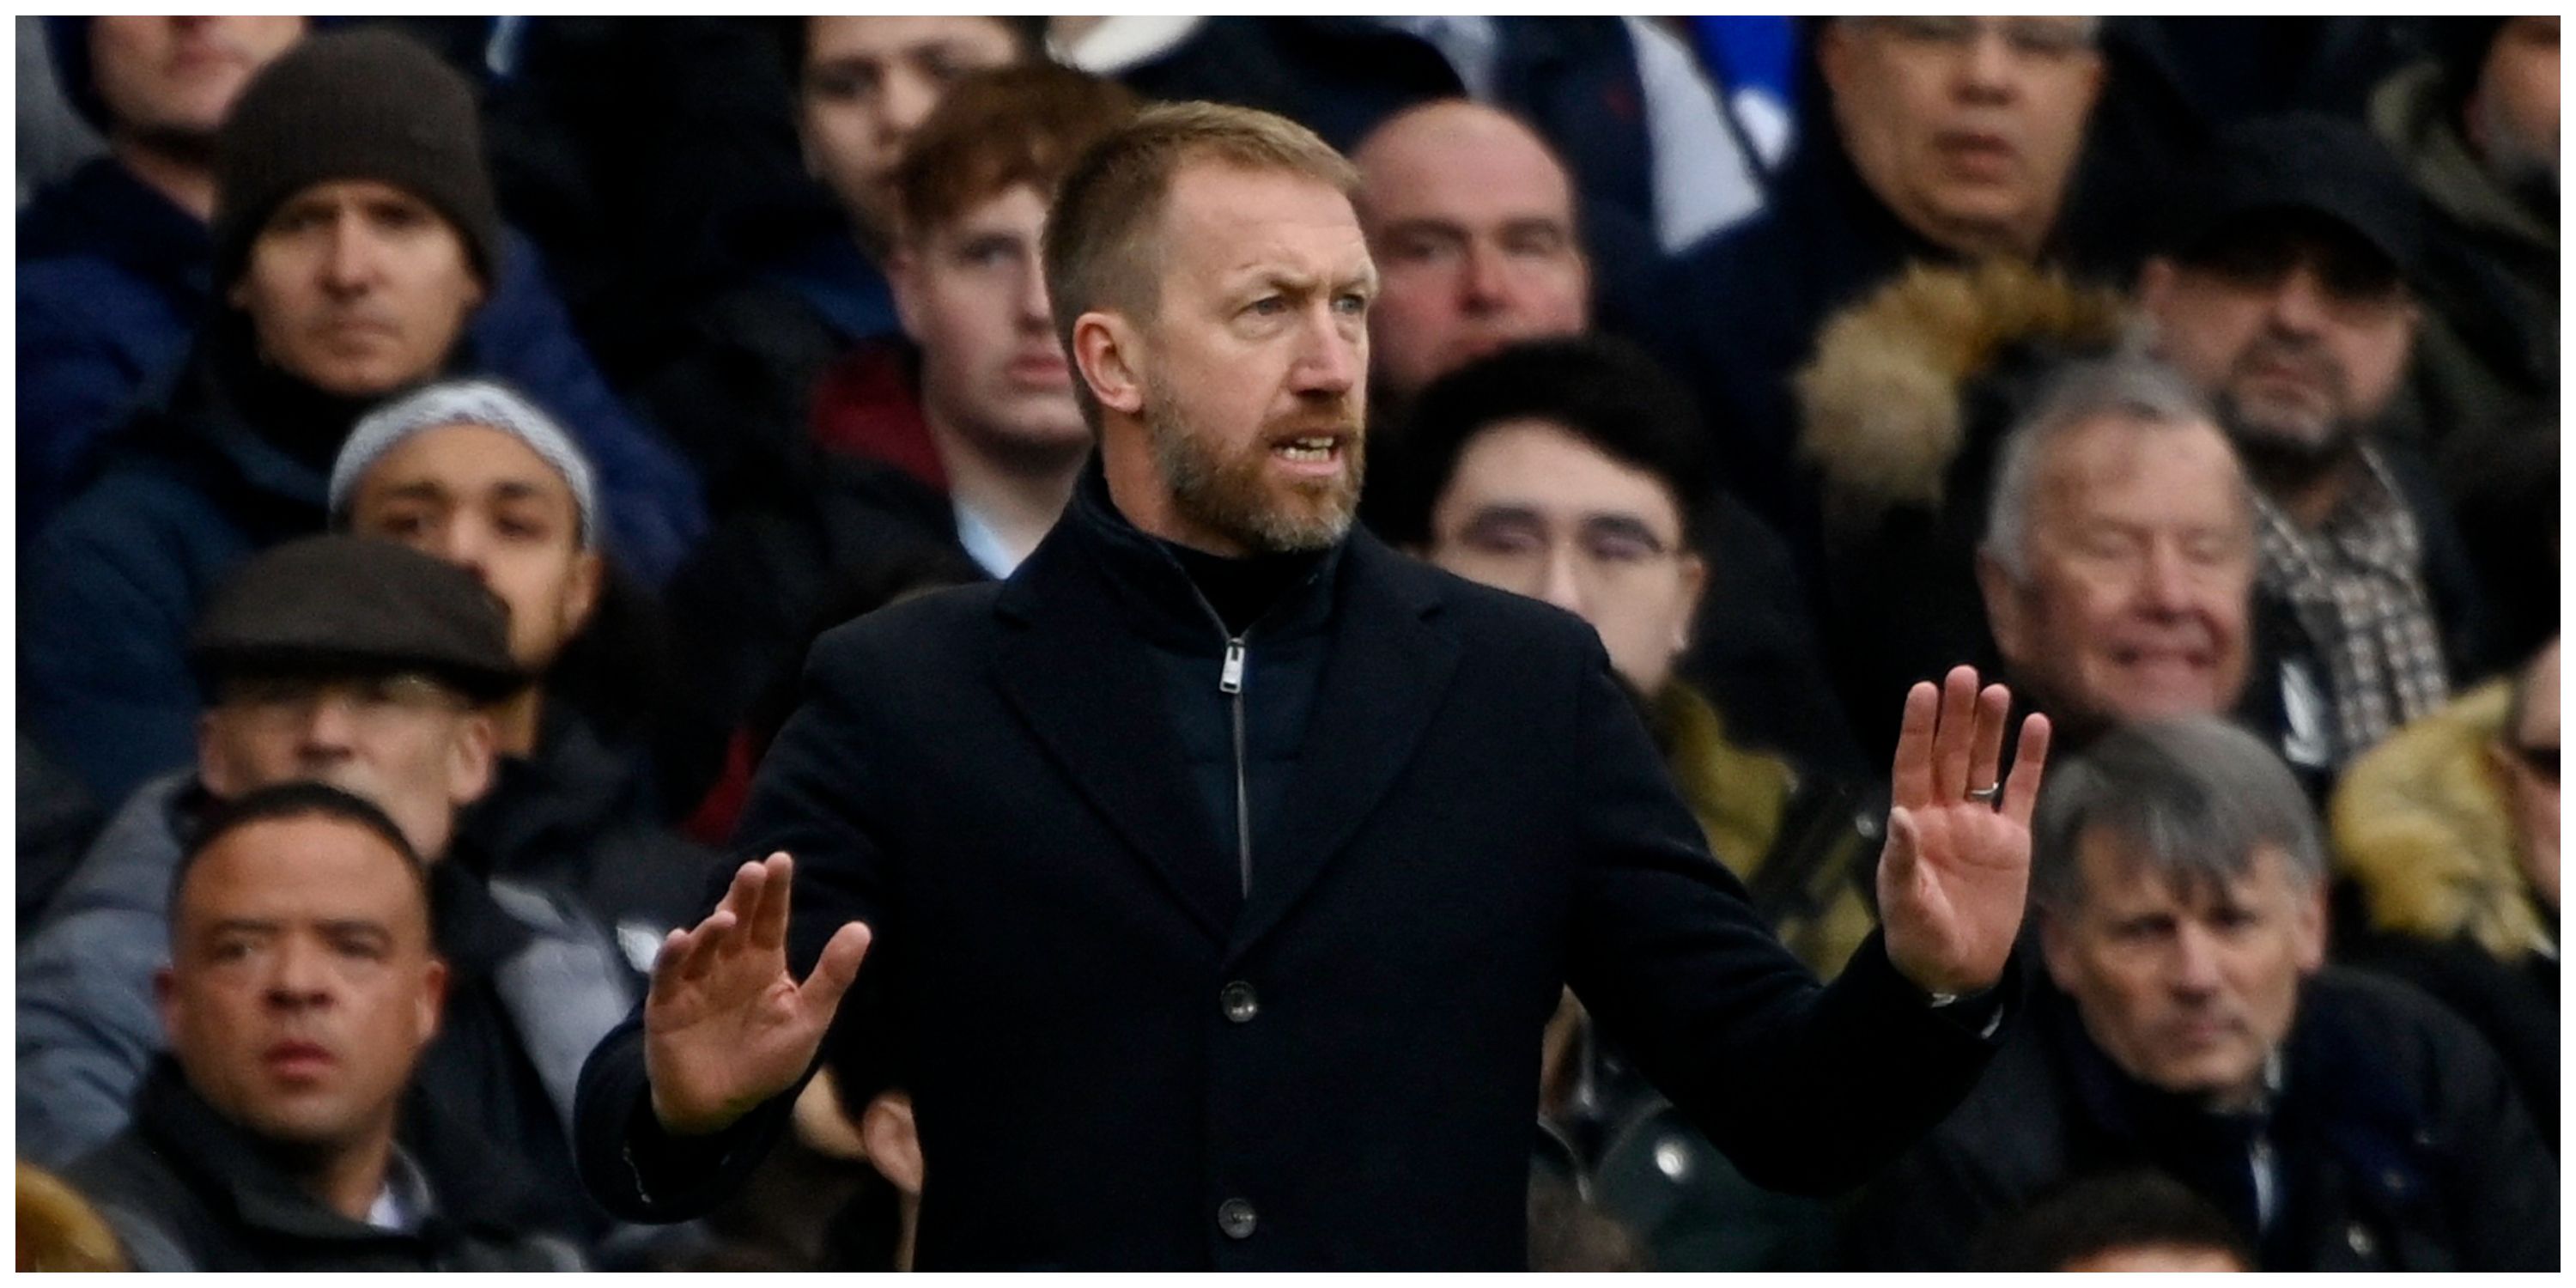 Chelsea manager Graham Potter staying calm on touchline